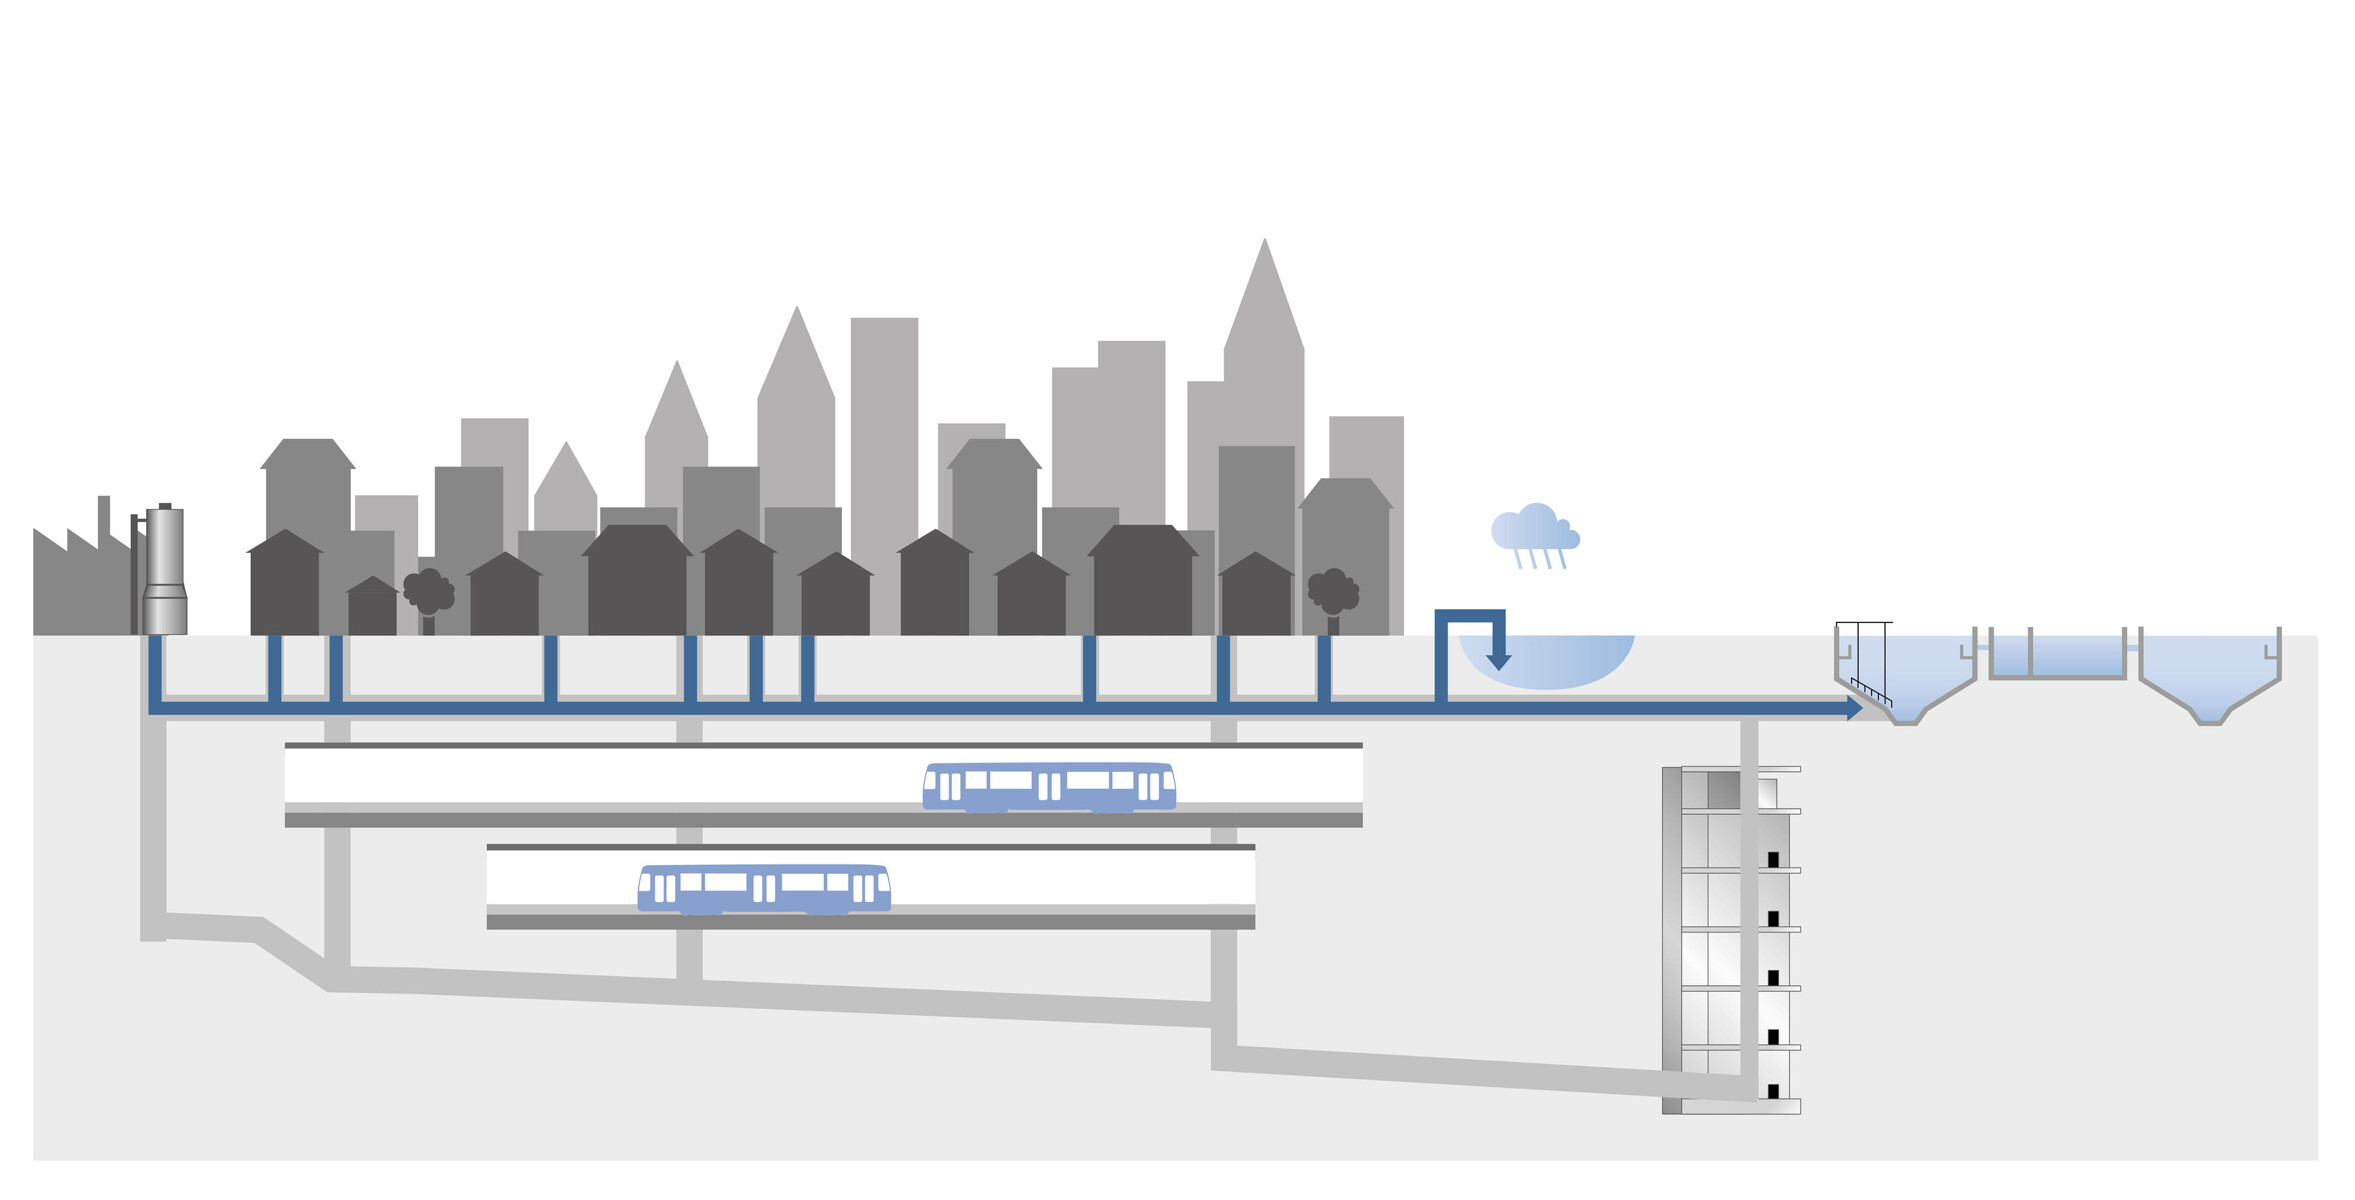 Diagram: the principle of draining combined sewers into deep tunnels below large cities